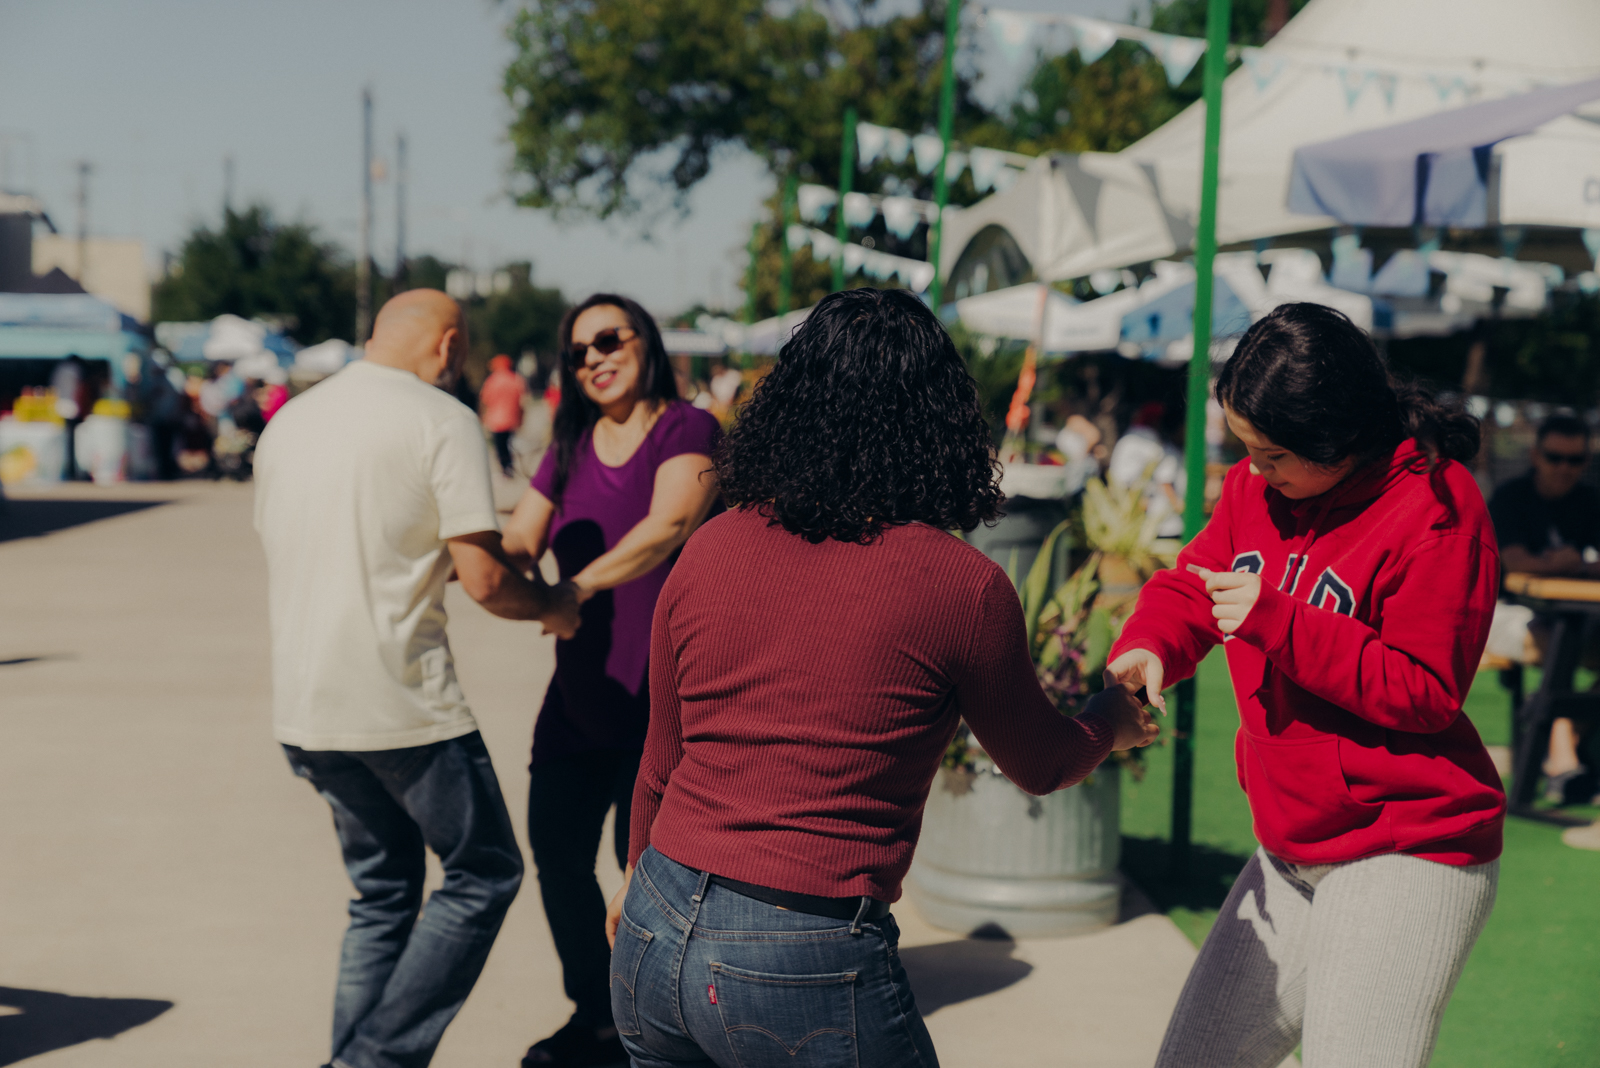 Attendees dance in the sunshine at a Latin City event.